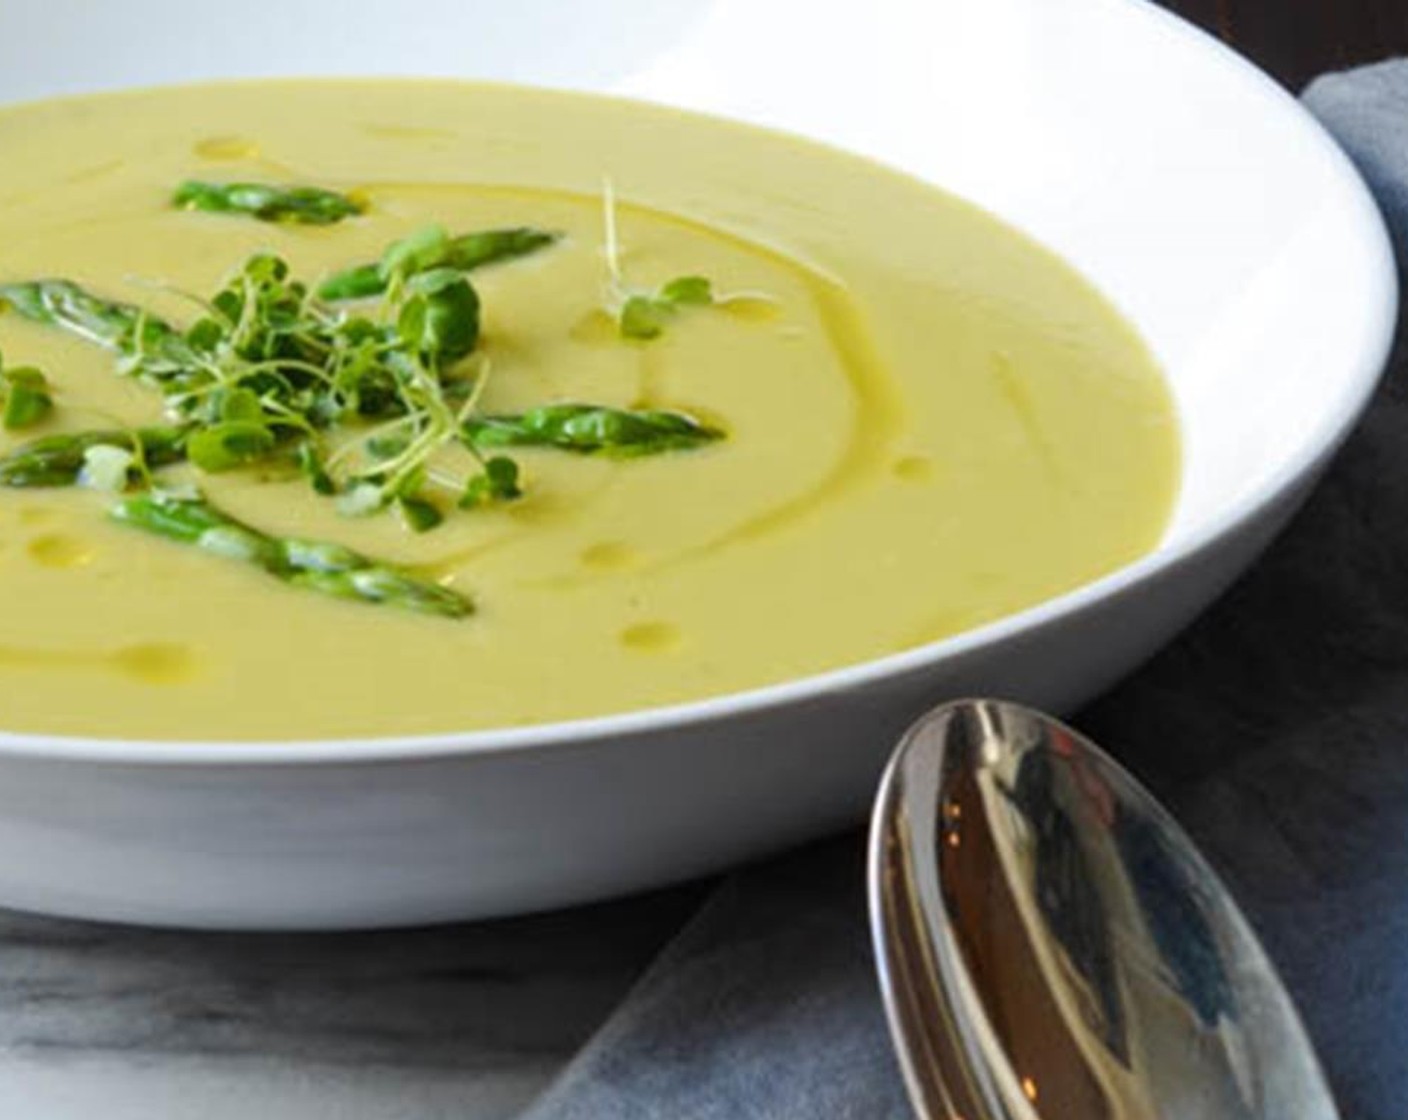 step 10 To serve, ladle the soup into bowls and swirl a teaspoon of olive oil over each bowl. Divide the asparagus tips among the bowls and float them in the soup. Top with a pinch of Microgreens (to taste) if desired.